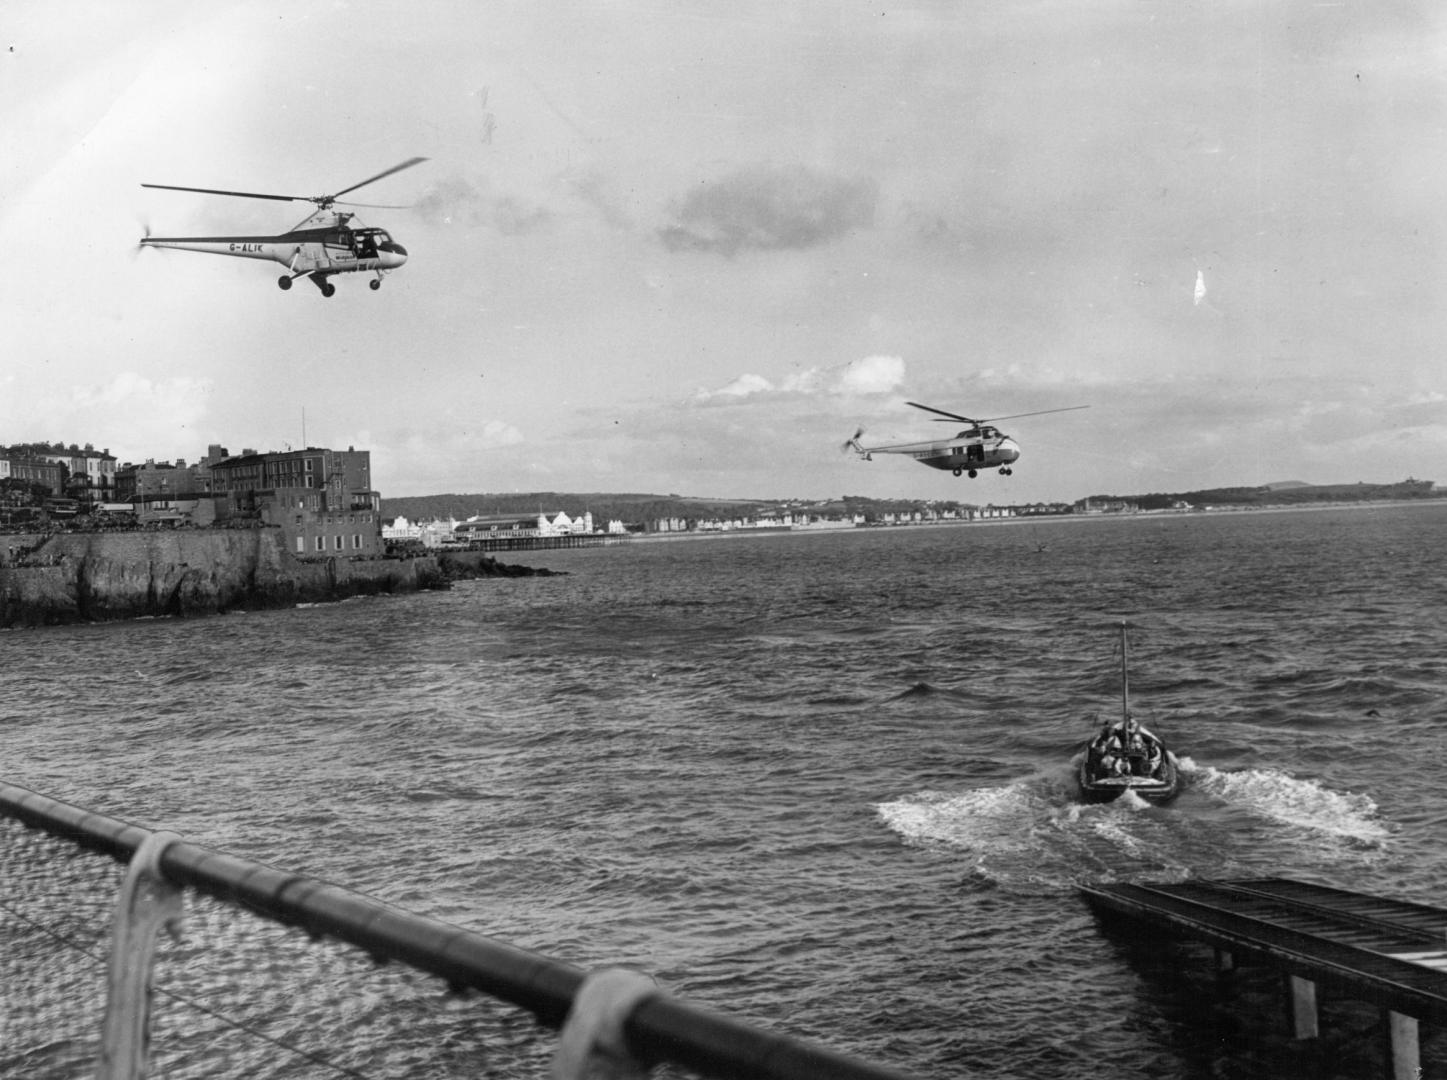 A historical photo of the RNLI lifeboat launching off Birnbeck Pier with two helicopters flying overhead at the same time.